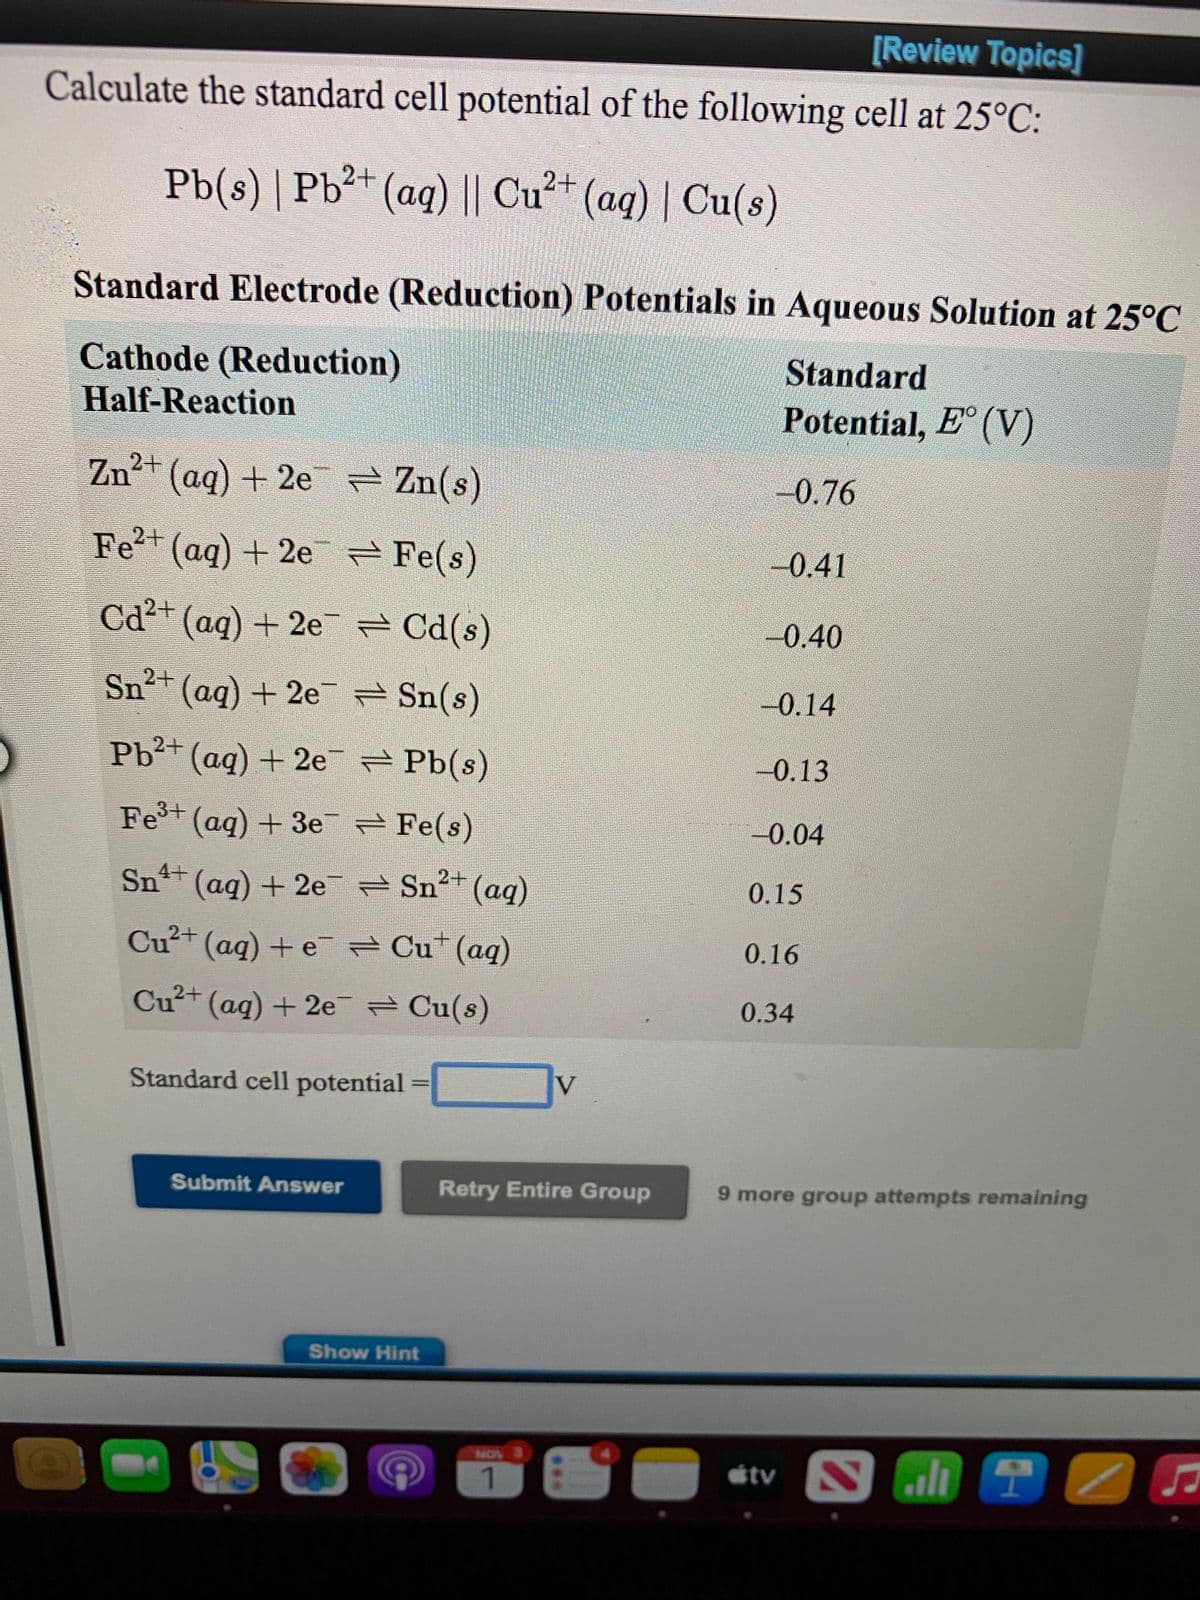 [Review Topics]
Calculate the standard cell potential of the following cell at 25°C:
Pb(s) | Pb²+ (aq) || Cu²* (aq) | Cu(s)
Standard Electrode (Reduction) Potentials in Aqueous Solution at 25°C
Cathode (Reduction)
Standard
Half-Reaction
Potential, E° (V)
Zn+ (ag) + 2e Zn(s)
-0.76
Fe²+ (aq) + 2e Fe(s)
-0.41
Cd²+ (aq) + 2e Cd(s)
-0.40
Sn²+ (aq) + 2e = Sn(s)
-0.14
Pb²+
(aq) + 2e Pb(s)
-0.13
Fe+ (ag) + 3e Fe(s)
-0.04
Sn+ (aq) + 2e Sn2+ (aq)
0.15
Cu?+ (ag) + e Cu*(aq)
0.16
Cu²+ (aq) + 2e Cu(s)
0.34
Standard cell potential
V
Submit Answer
Retry Entire Group
9 more group attempts remaining
Show Hint
NOV
1.
...
